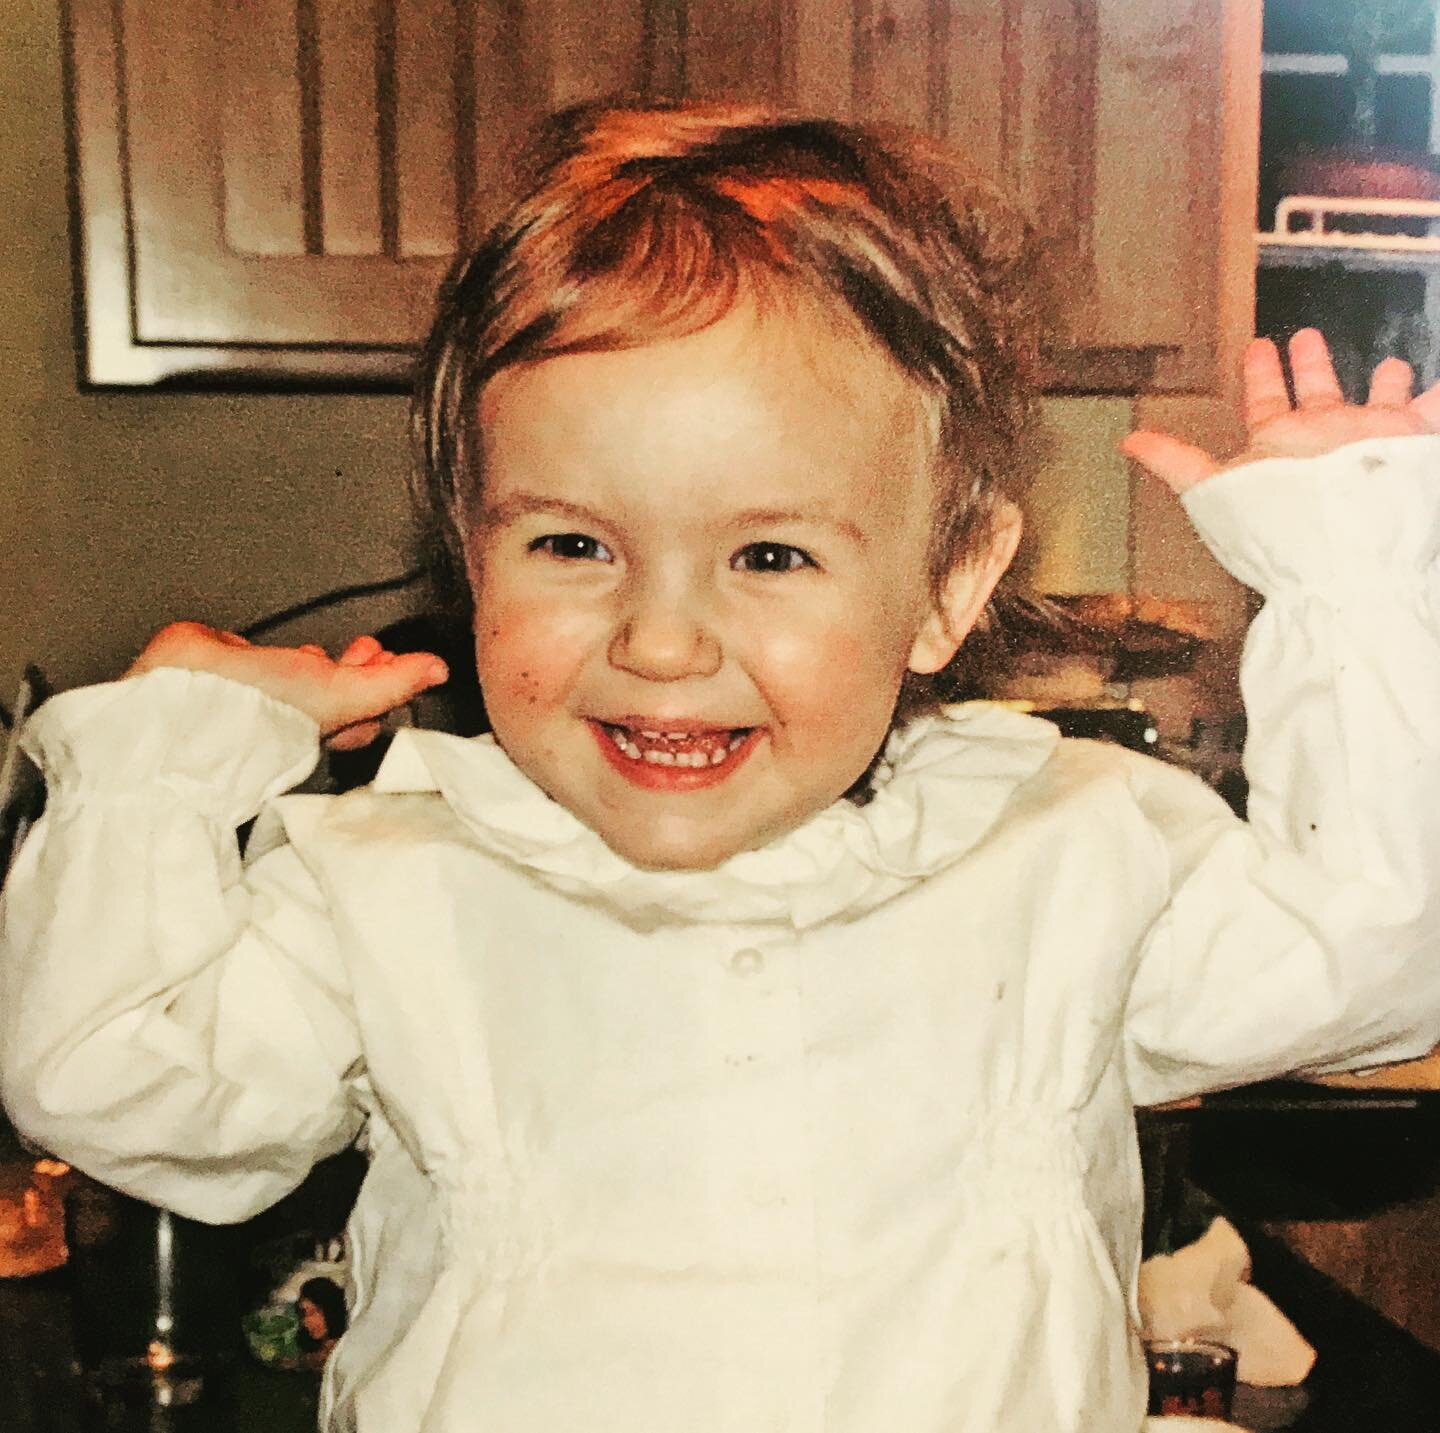 Happy 18th Jessie 💕💝 🥰This picture of you is on your 2nd Birthday exactly 16 years ago. You blessed our world the day you were born 1/30/2003. You continue to bless our lives with your smile, your light, your passion, and your incredible spirit to